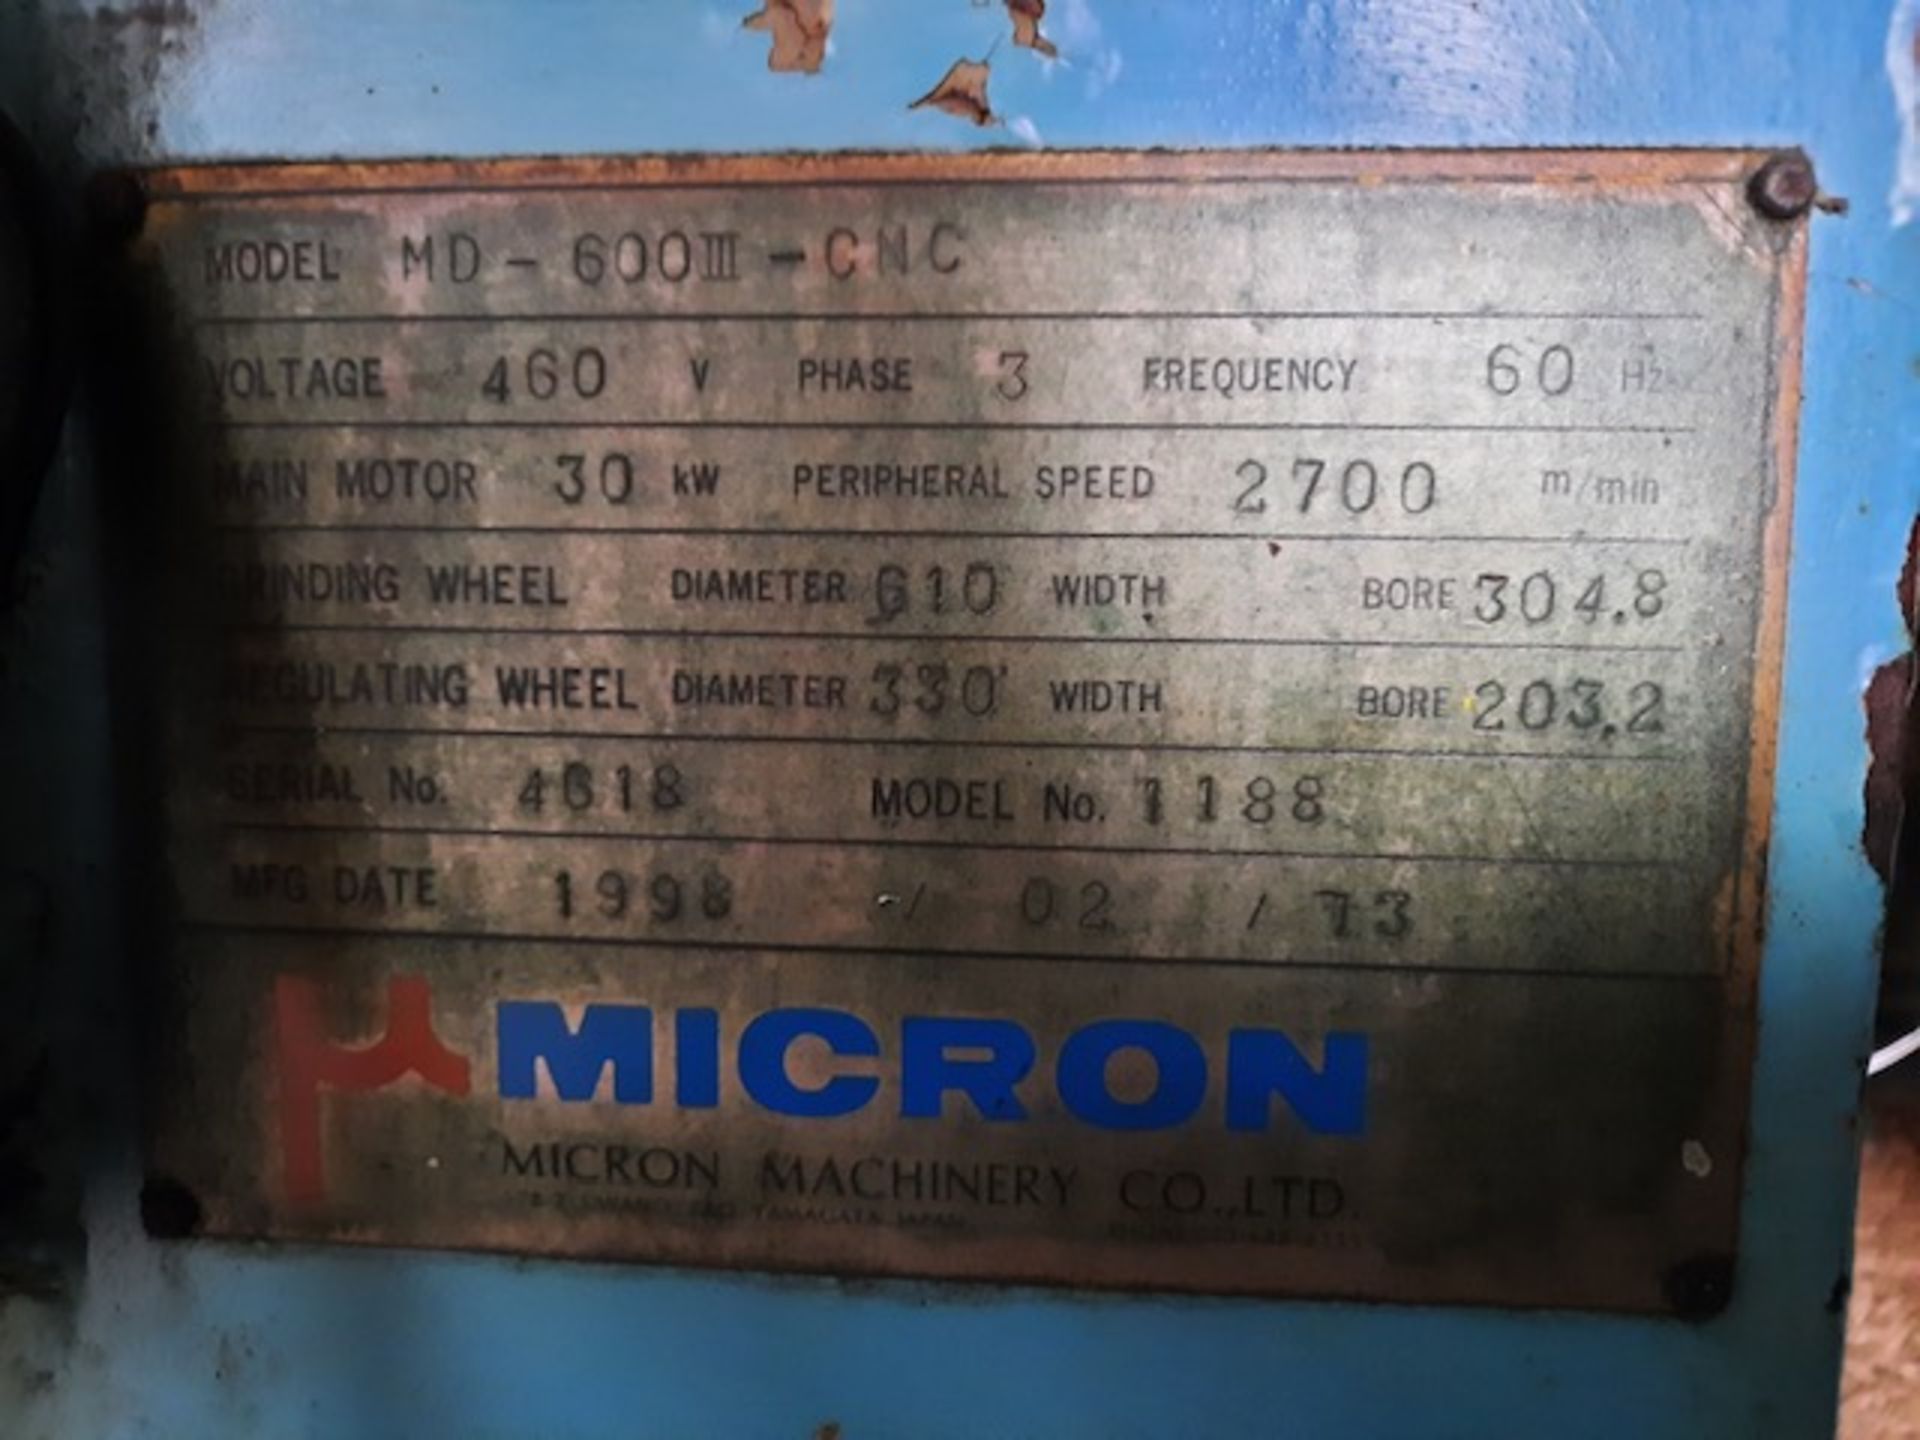 1998 Micron Centerless Grinder MD-600III - CNC - Image 7 of 7